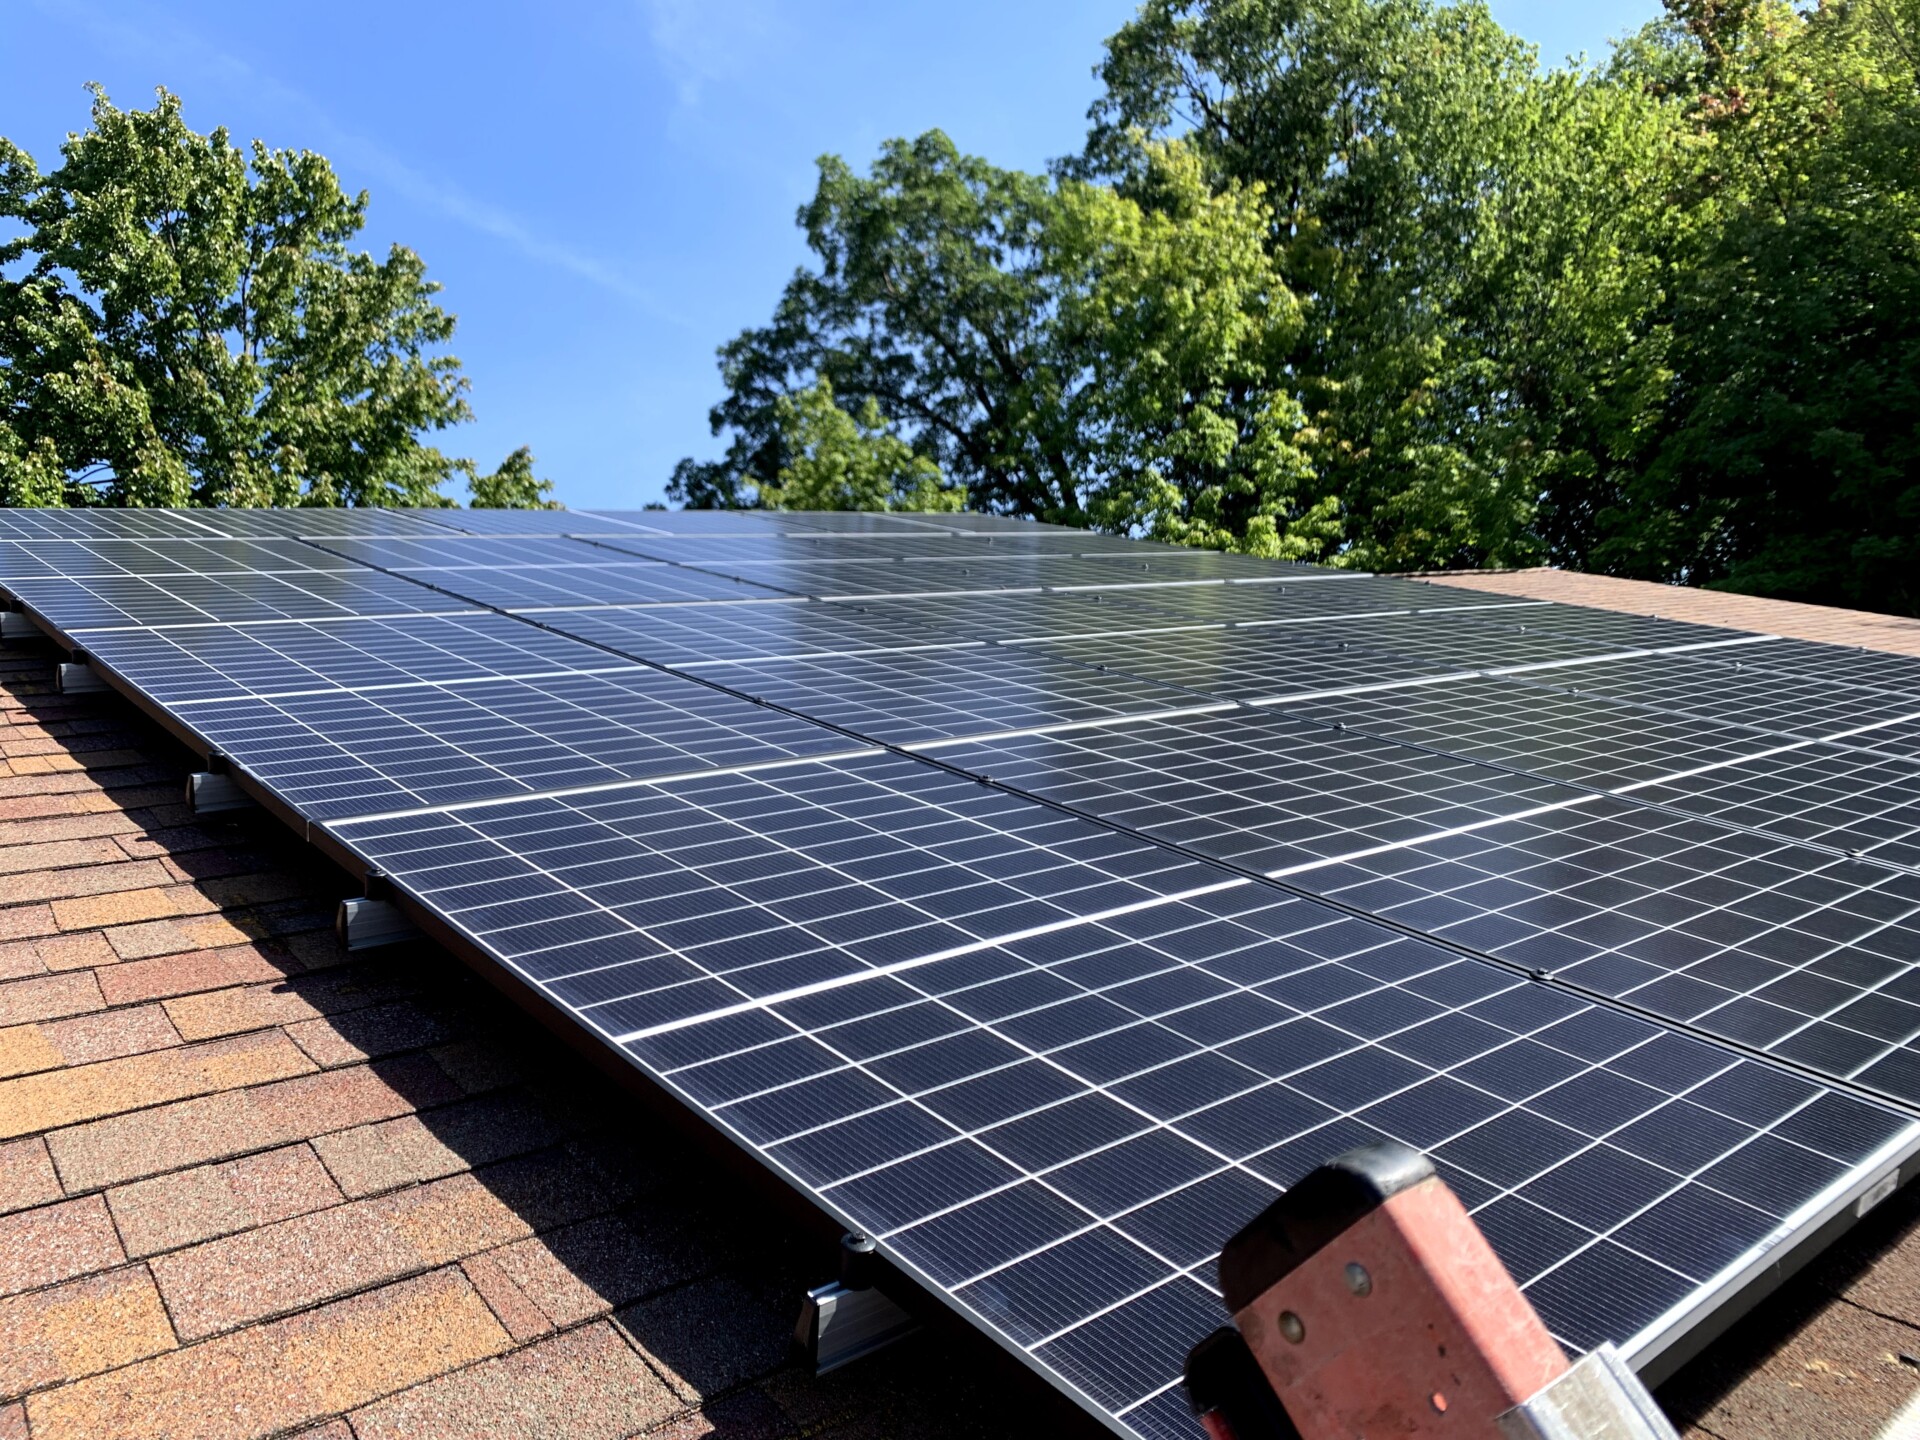 Solar panels on roof of Vermont home in Spring